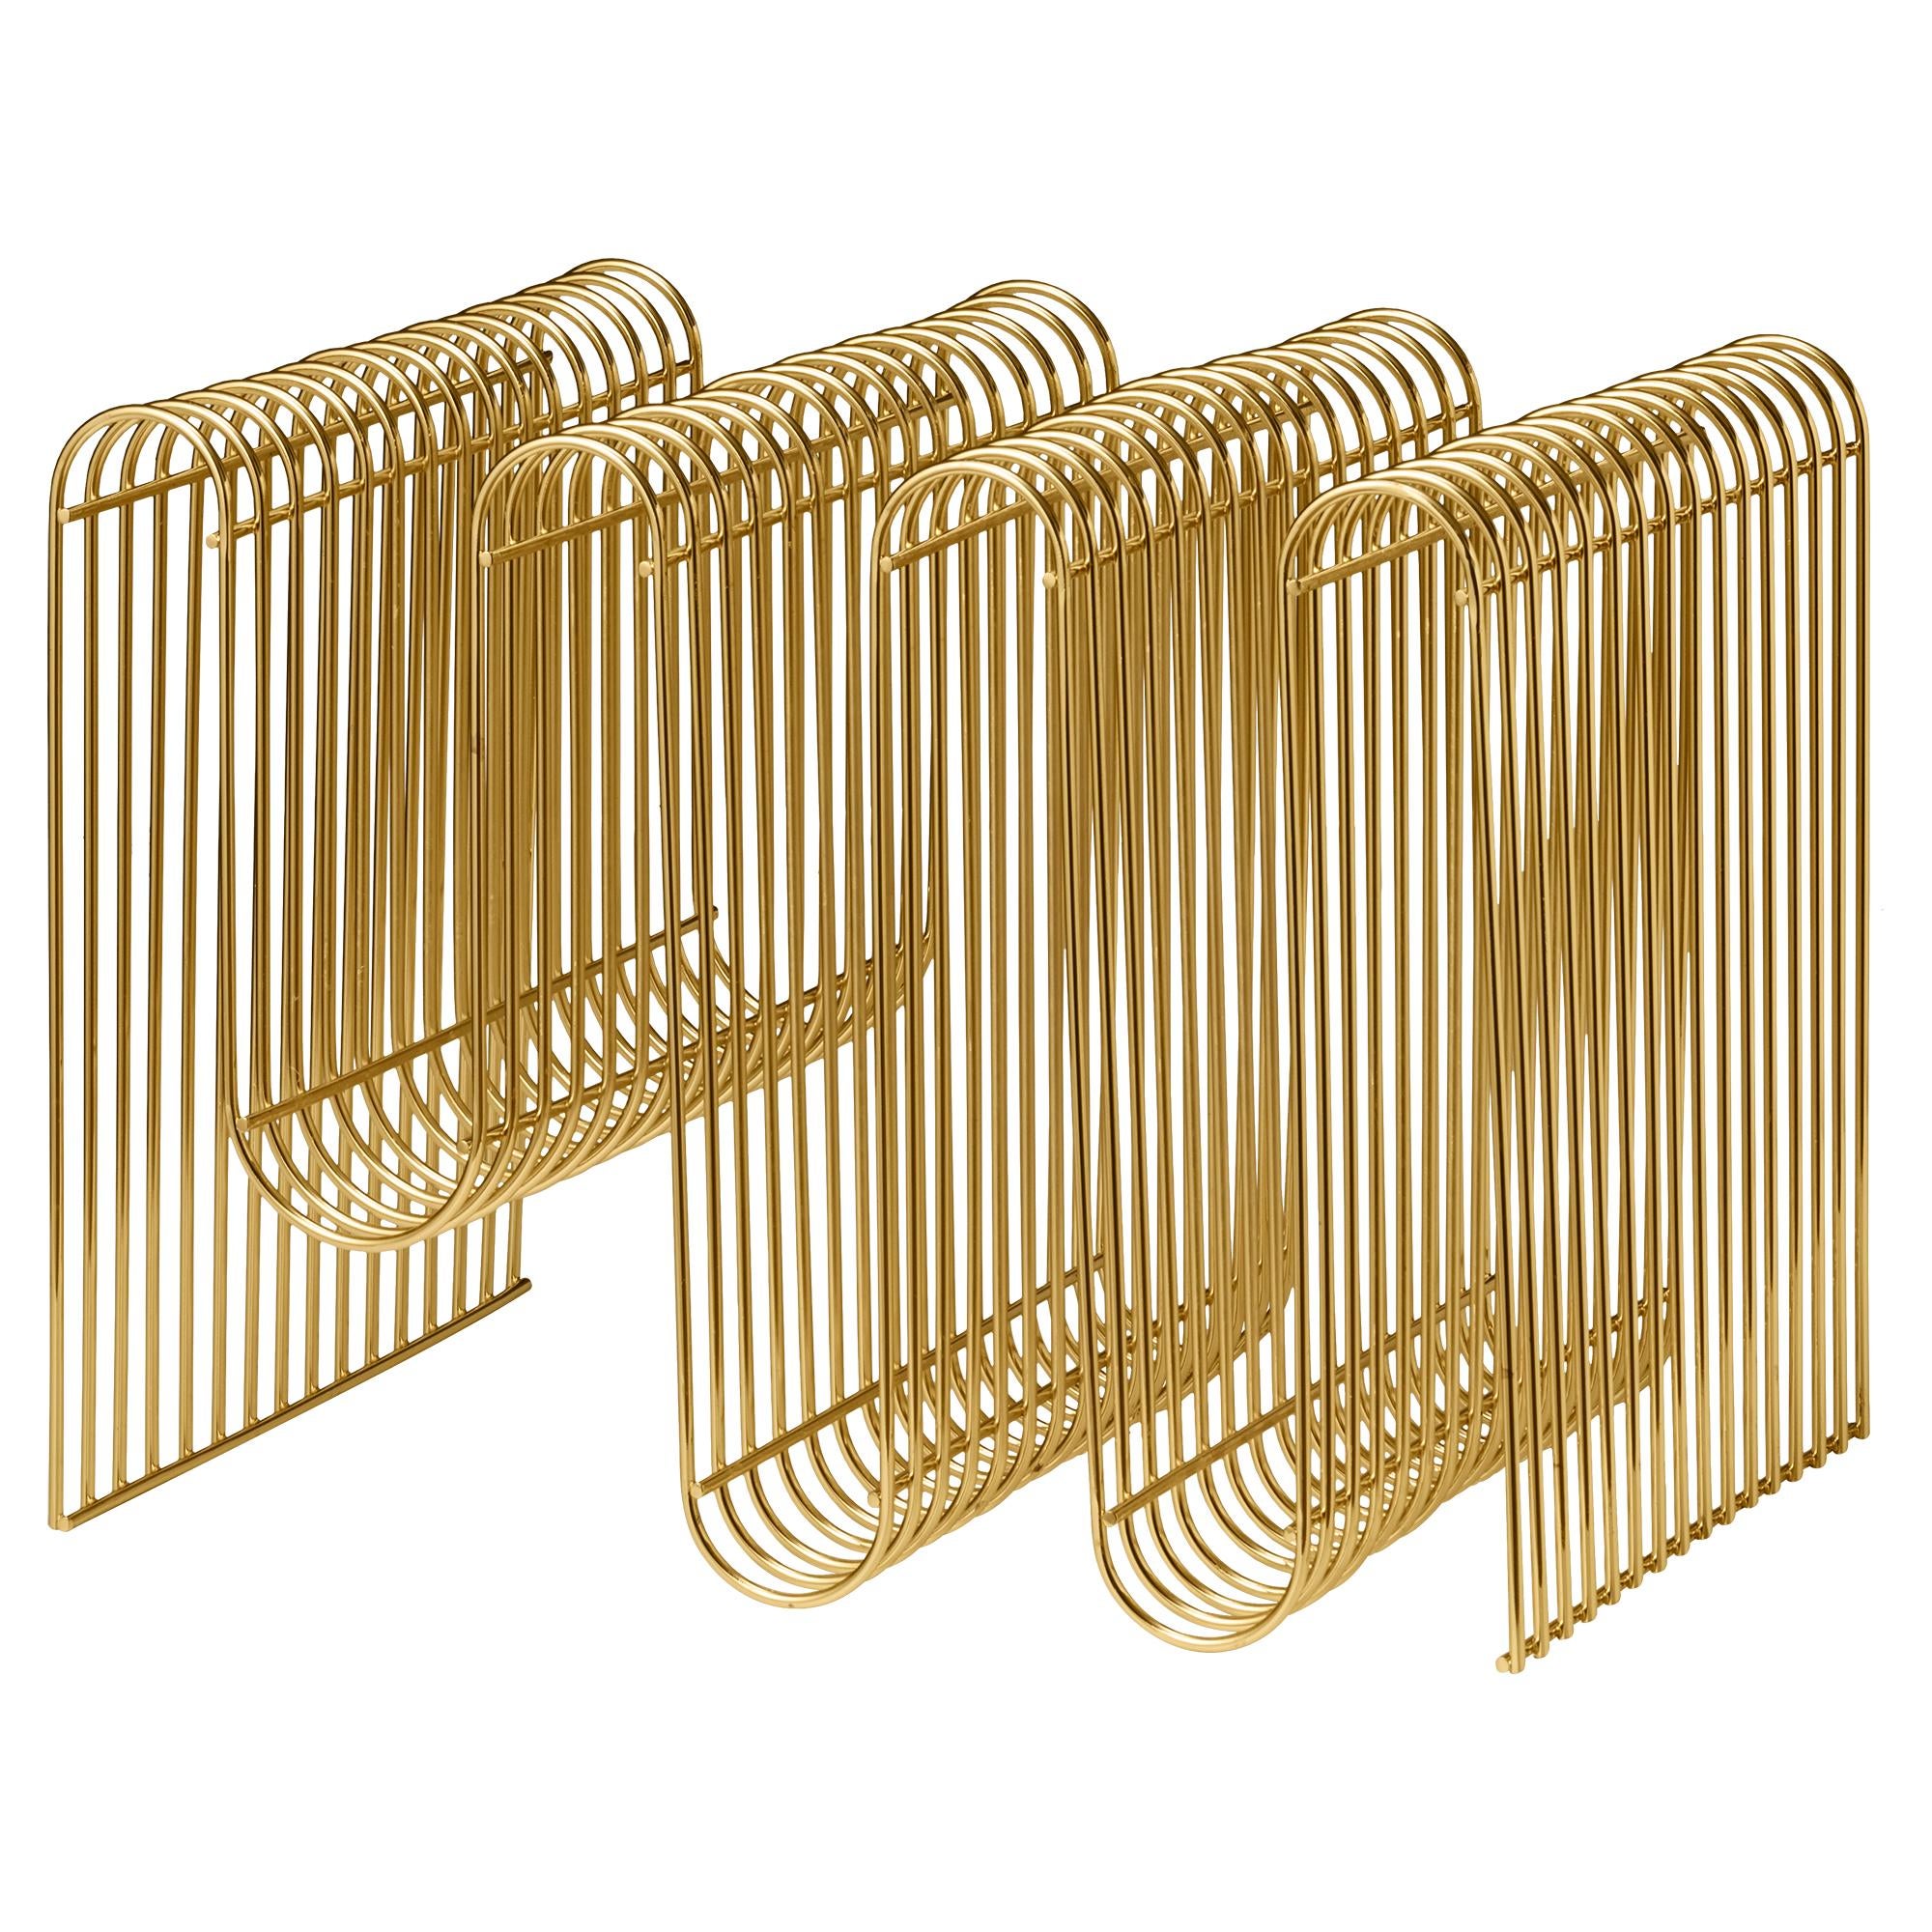 Gold contemporary magazine holder
Dimensions: L 40.5 x W 30.3 x H 30.3 cm 
Materials: Steel.
Also available in Silver and Black. Please contact us for more information. 


The design of the Curva magazine holder has become an instant icon. The